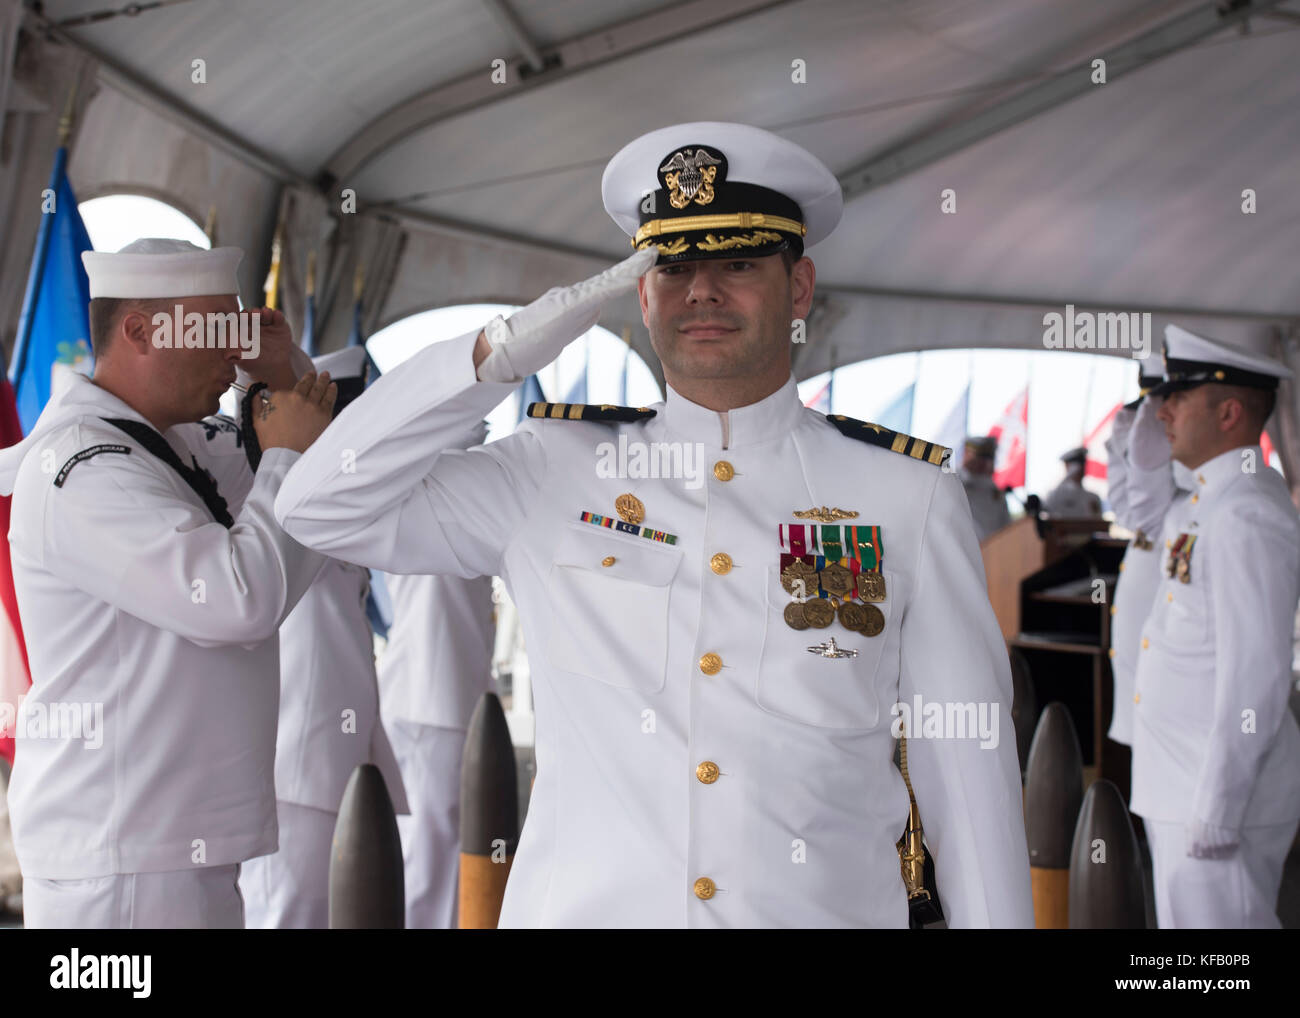 U.S. Navy Naval Submarine Support Command Commander Christopher Lindberg is piped aboard the Battleship Missouri Memorial during a change-of-command ceremony October 13, 2017 in Pearl Harbor, Hawaii.   (photo by Michael Lee via Planetpix) Stock Photo